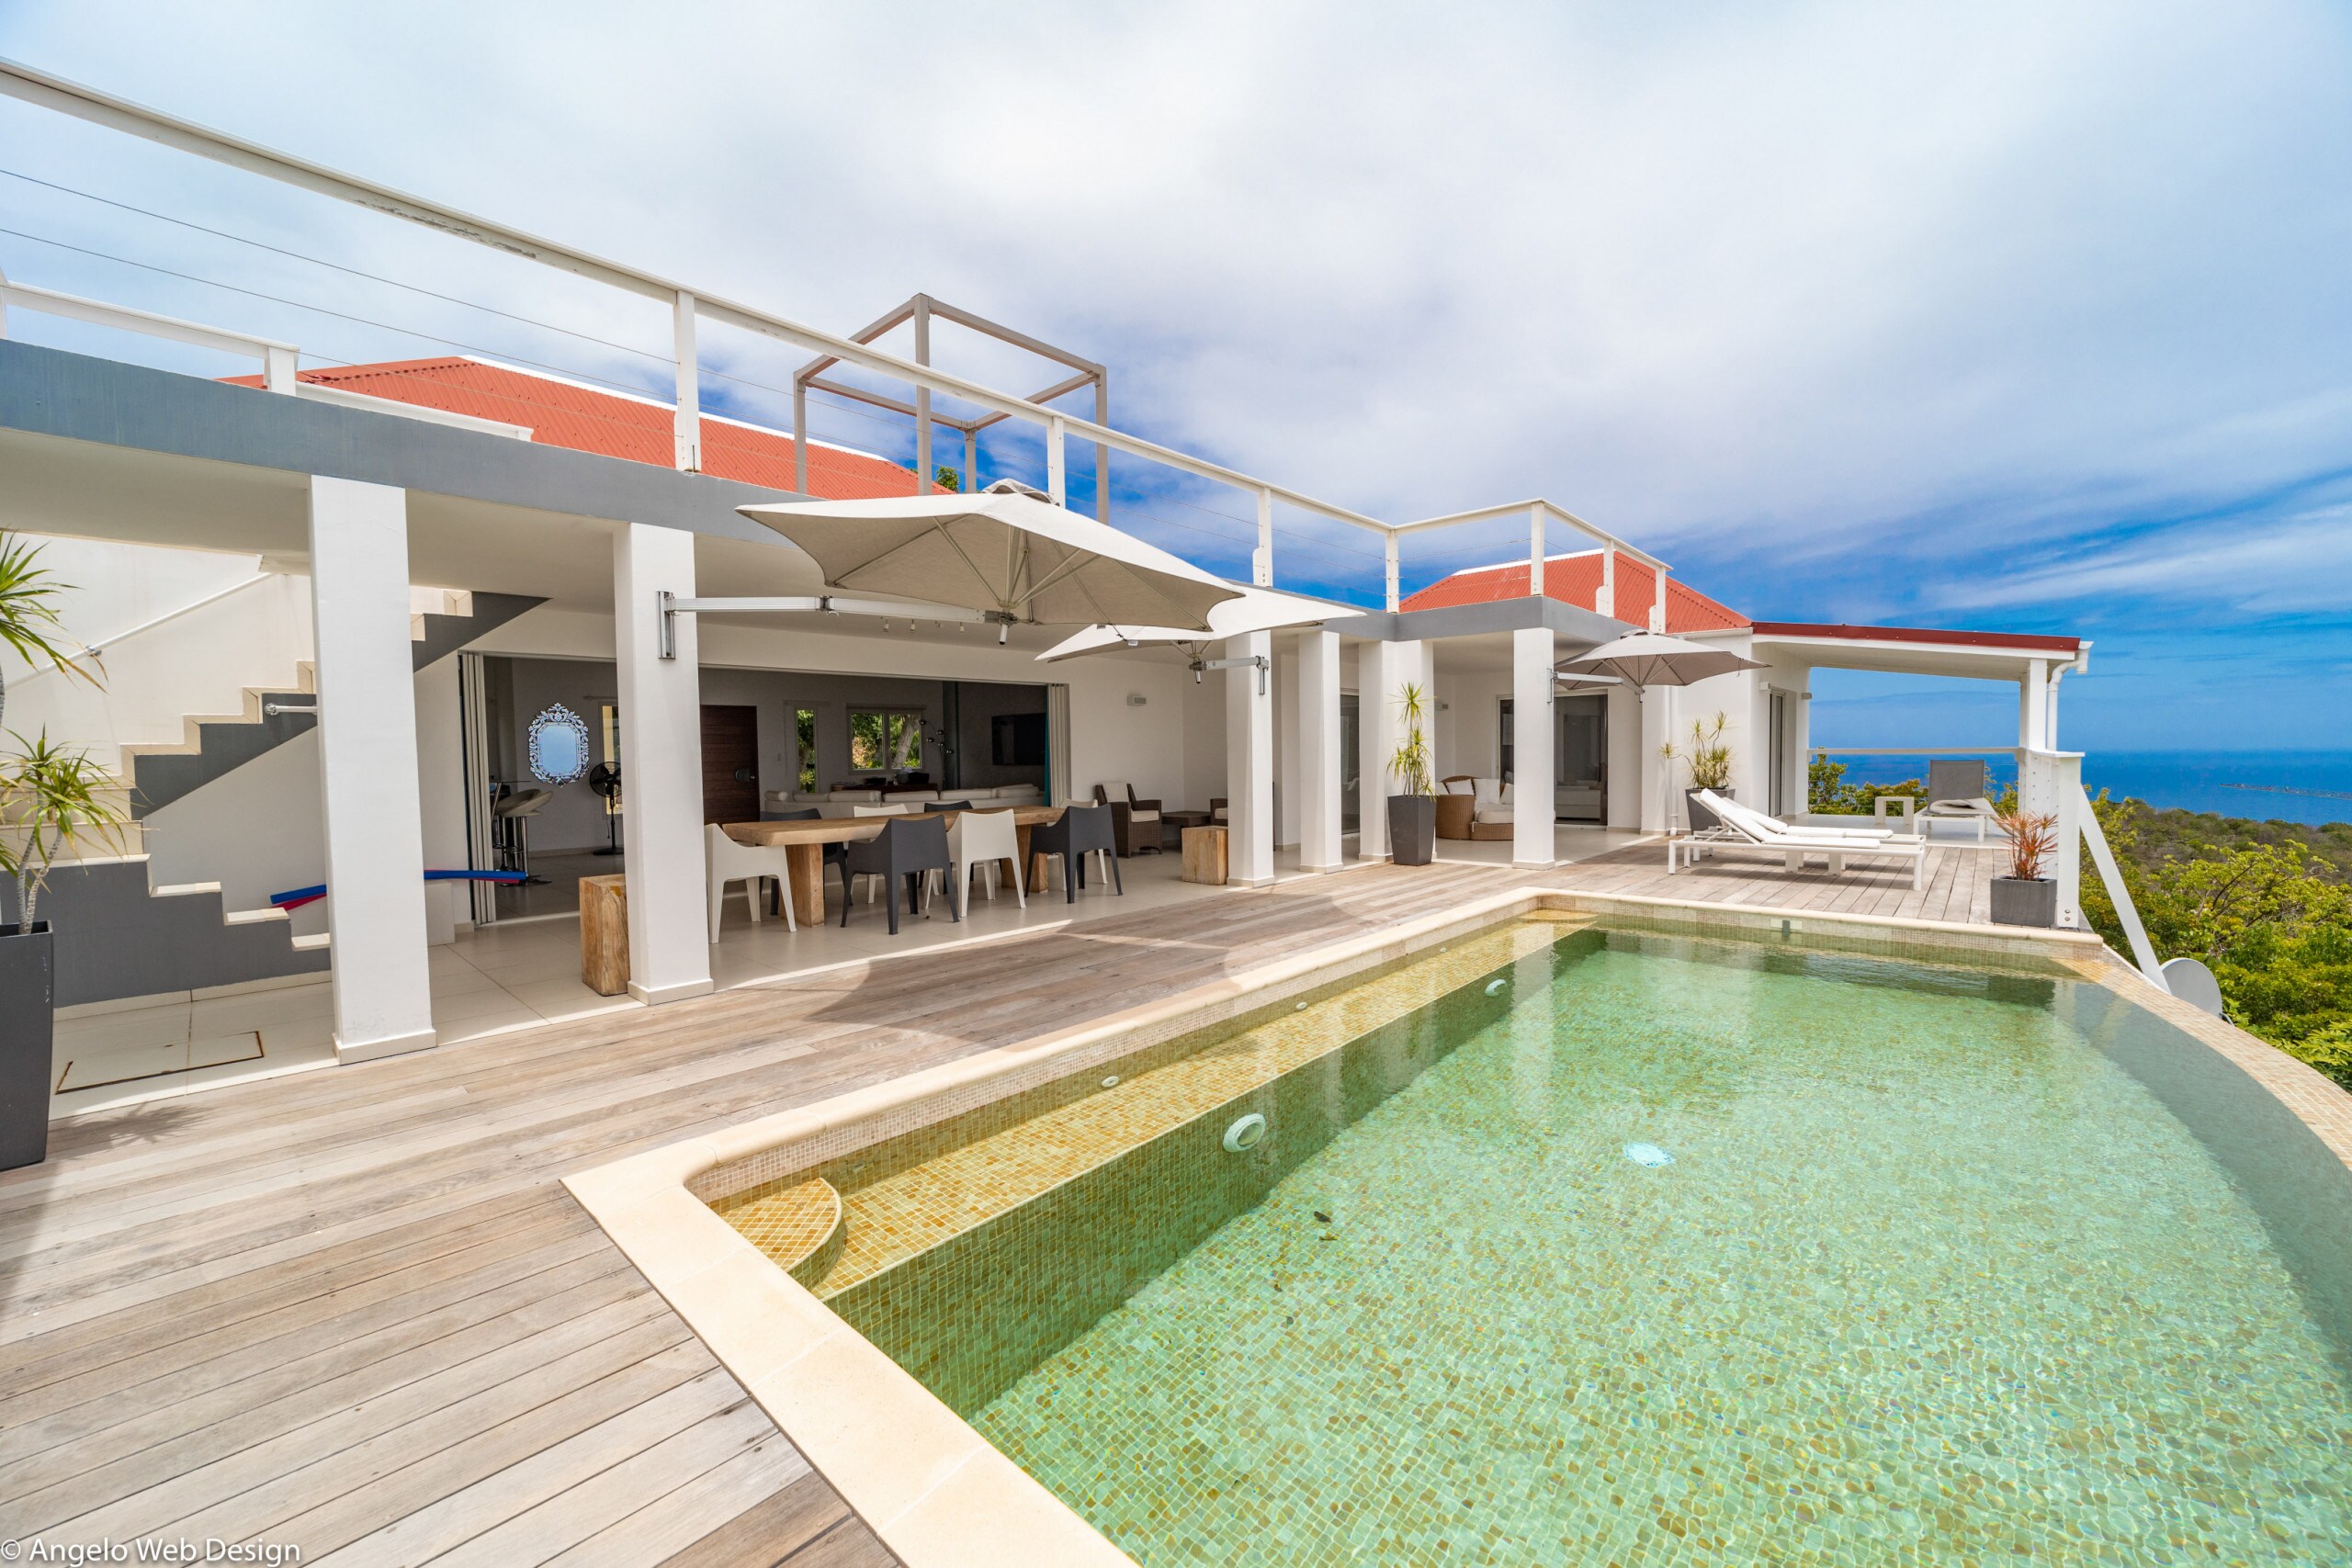 Heated pool, deck chairs, large terrace surrounding the pool.&nbsp;